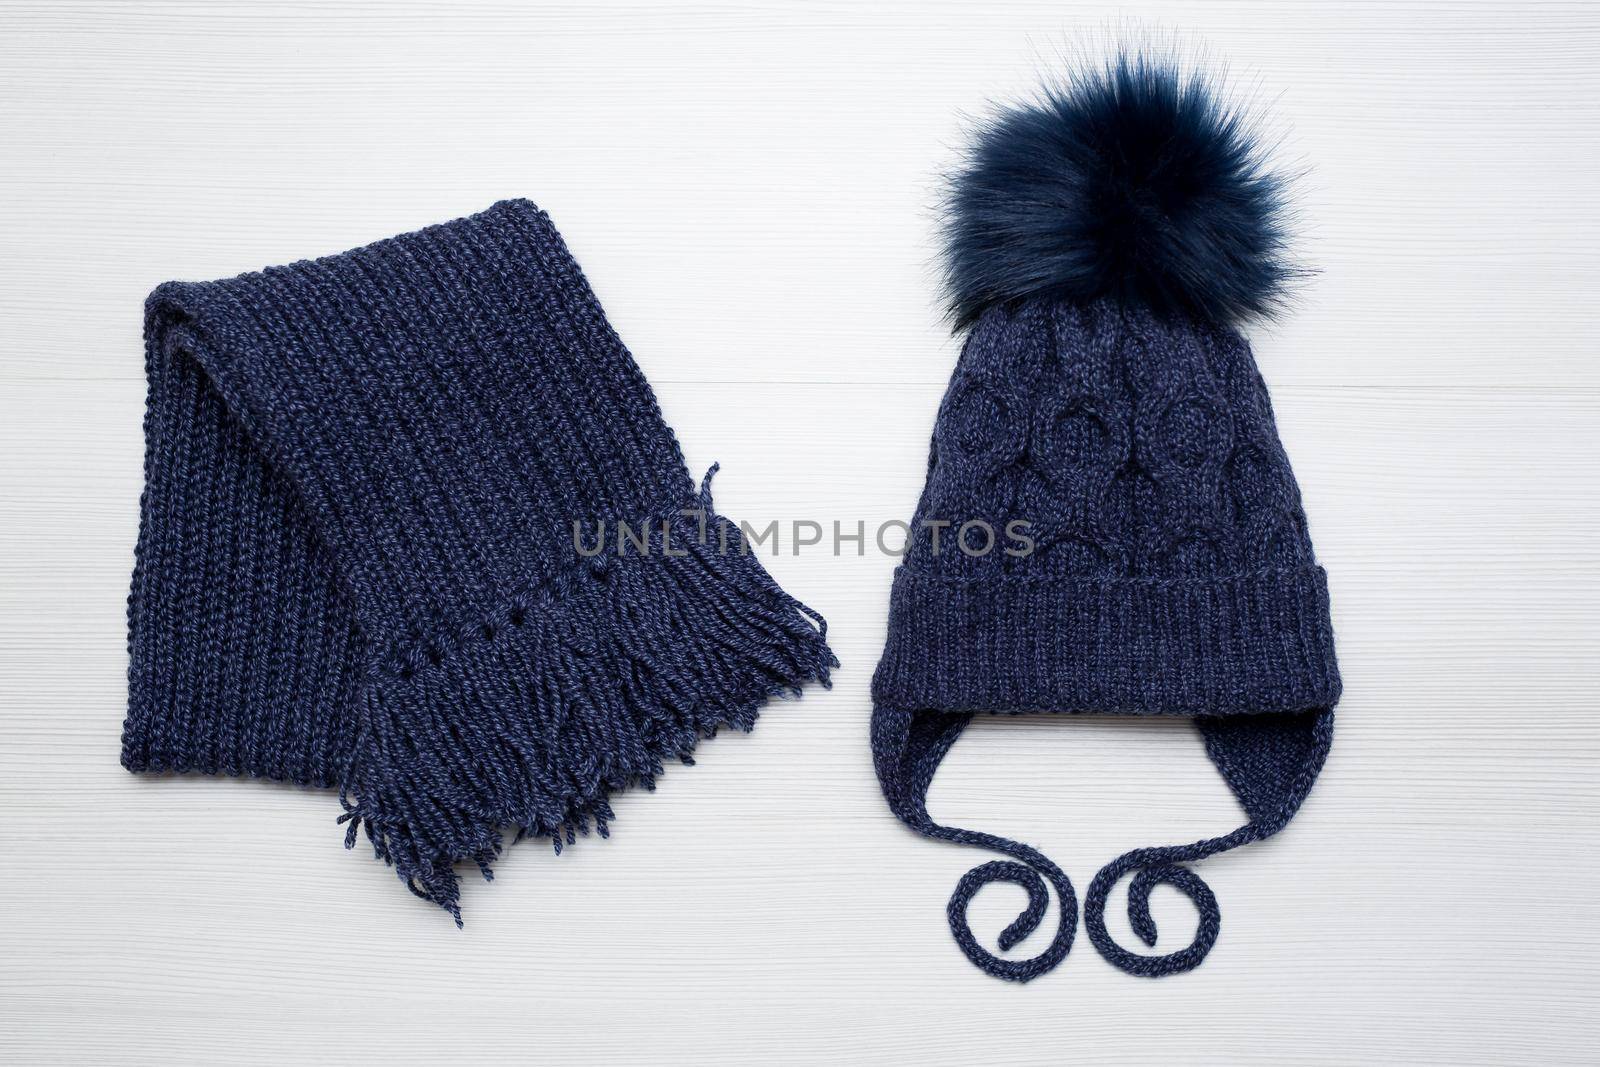 Winter children's knitted hat and scarf in blue. by StudioPeace